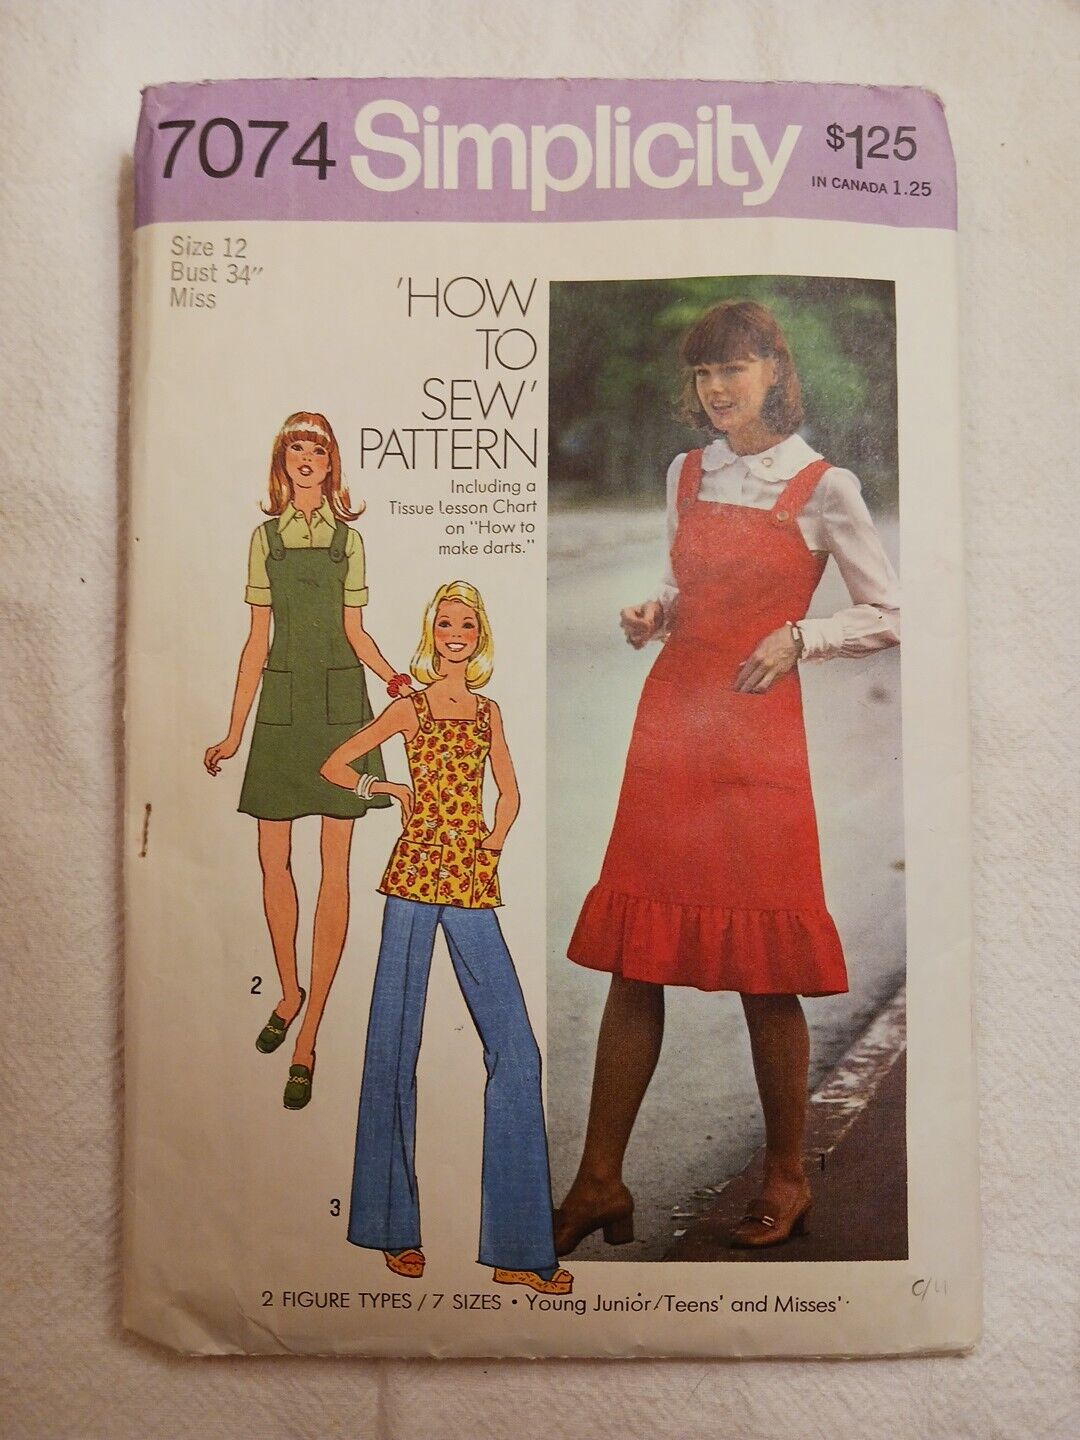 VINTAGE 1975 SIMPLICITY 7074 Sewing Pattern, Jumper/Dress Sz 12 MISS. Preowned.